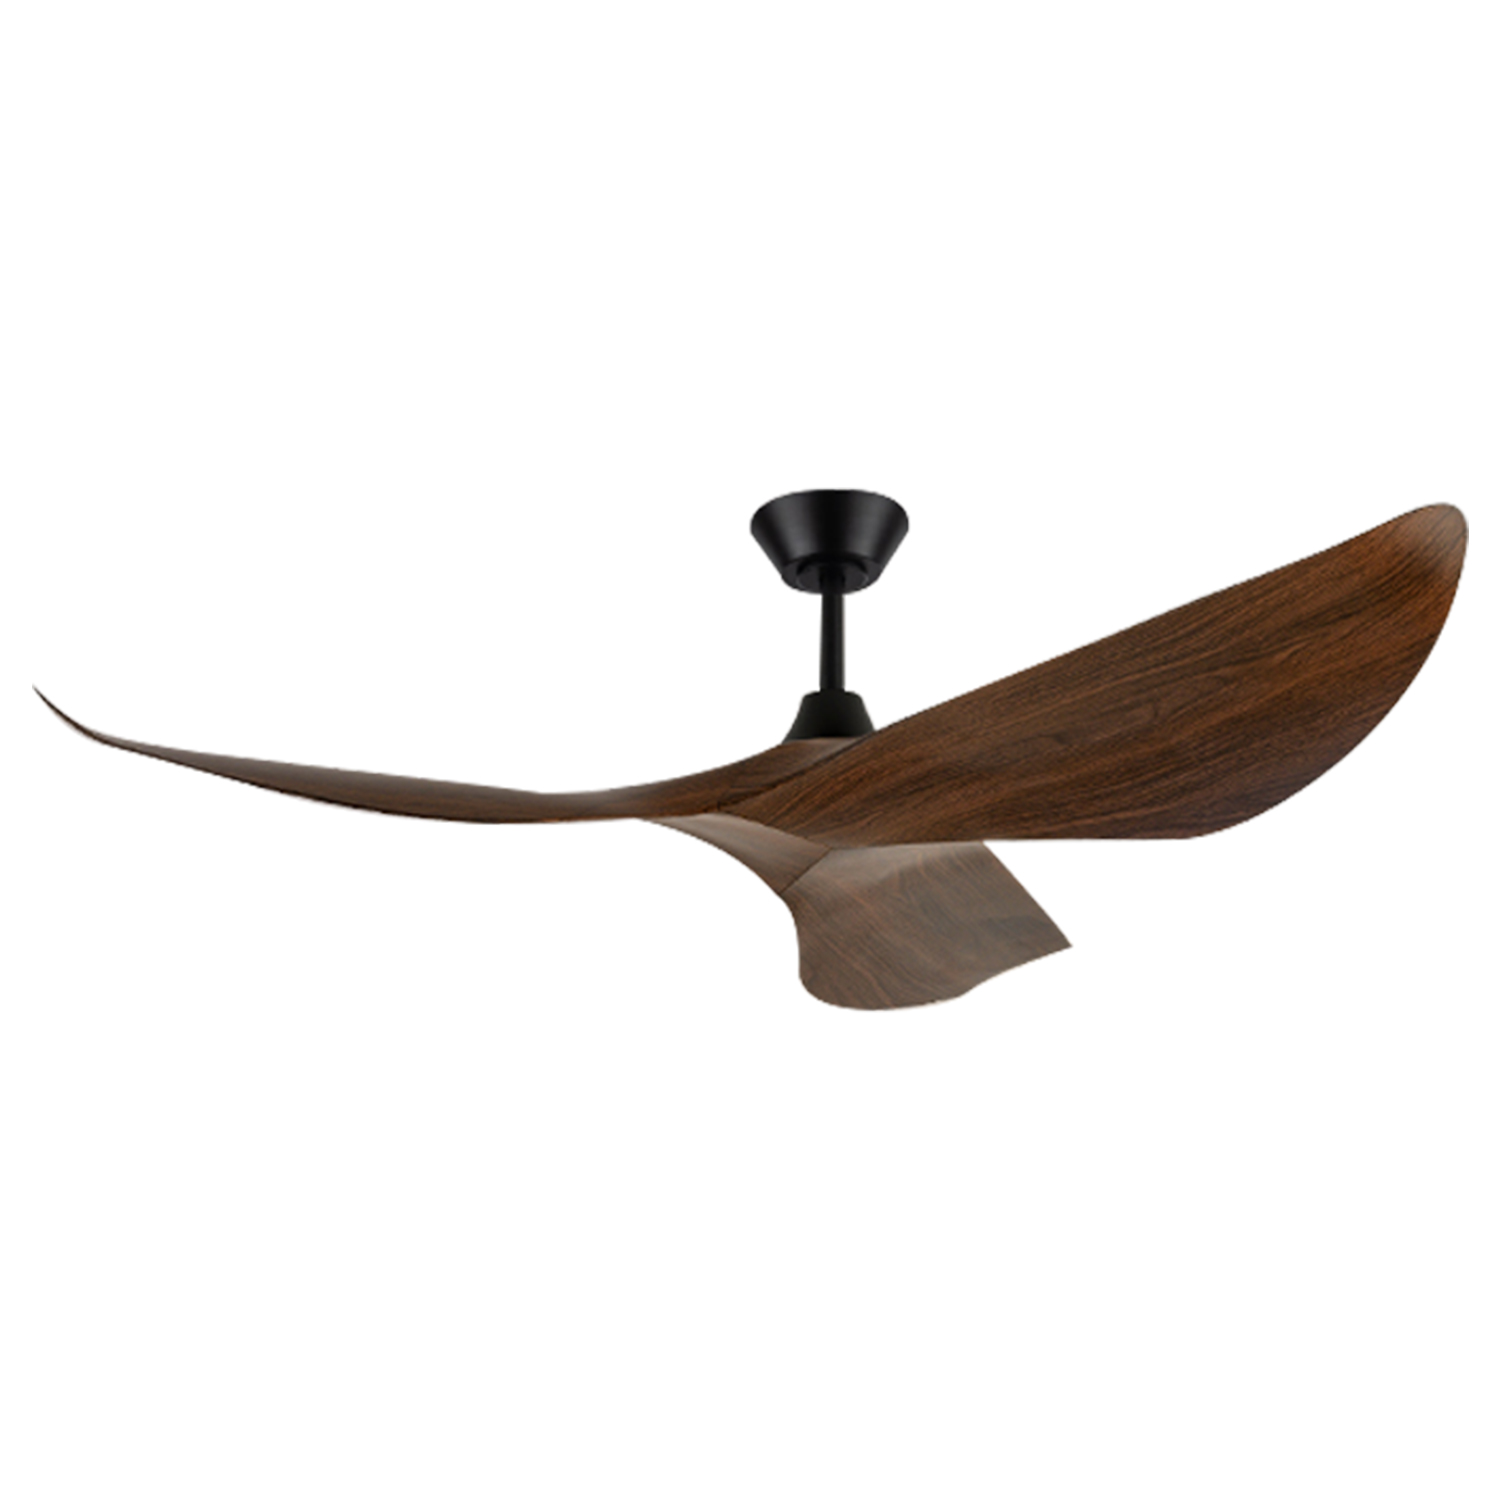 Stay Cool with a Stylish Ceiling Fan Inspired by Helicopter Design